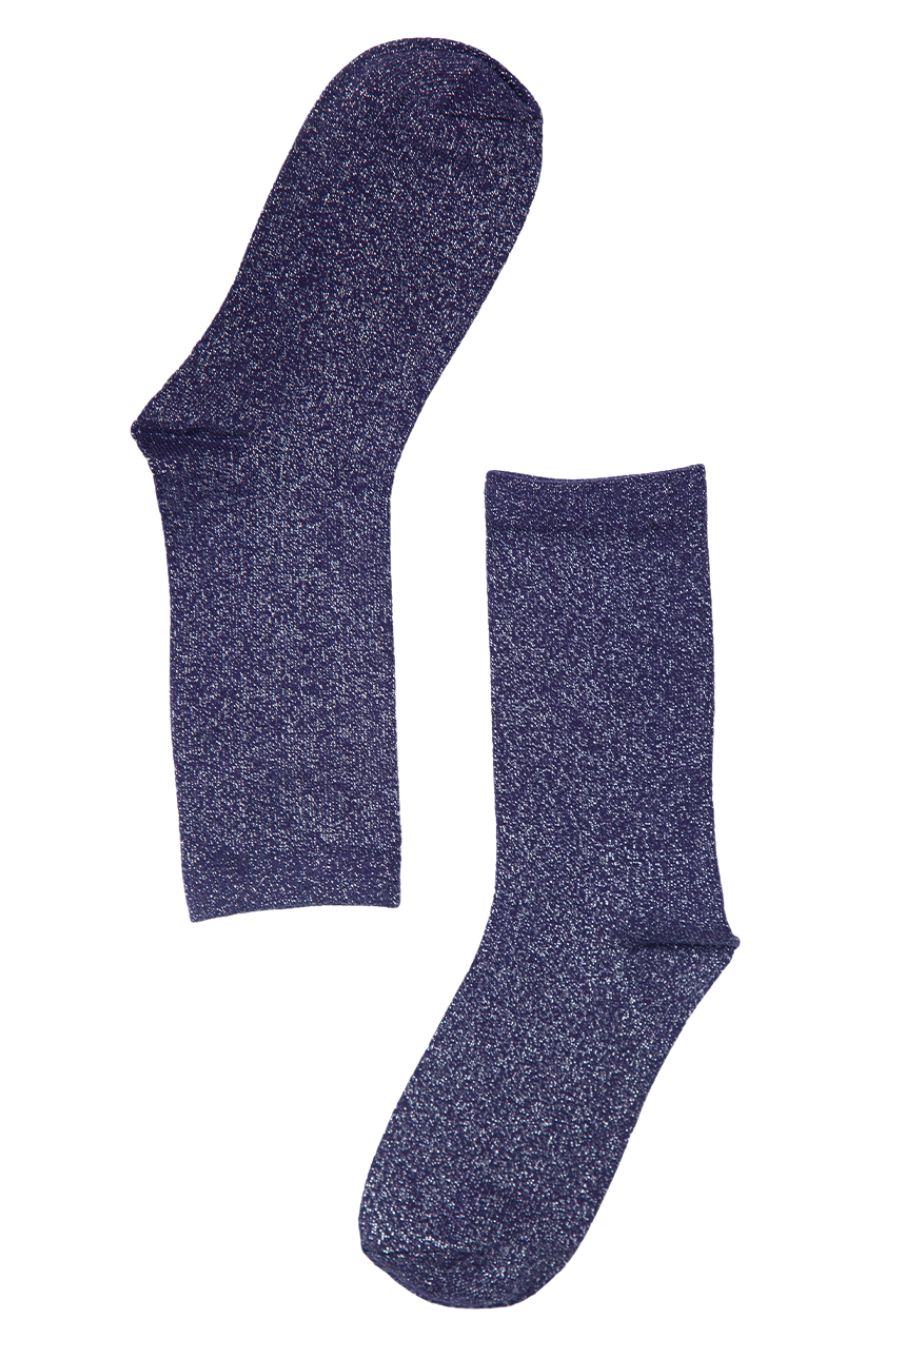 navy blue and silver glitter ankle socks